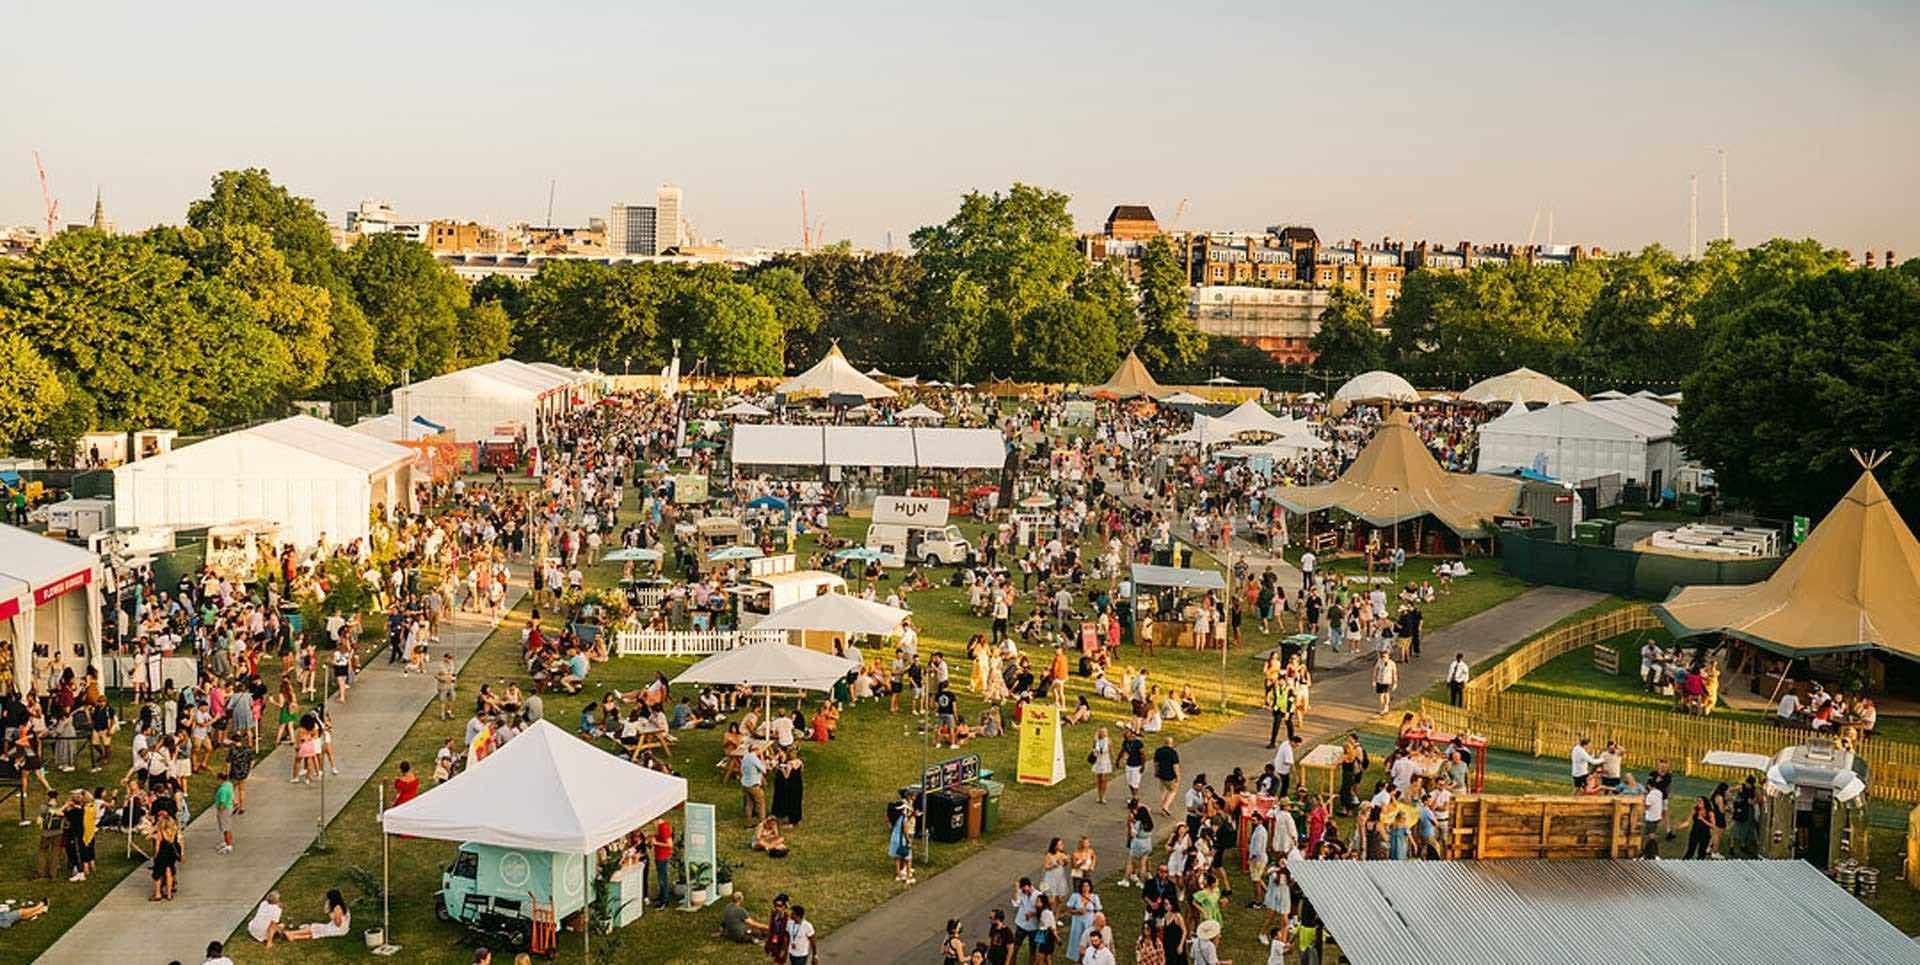 Taste of London promises an epic celebration for its 20th anniversary -image